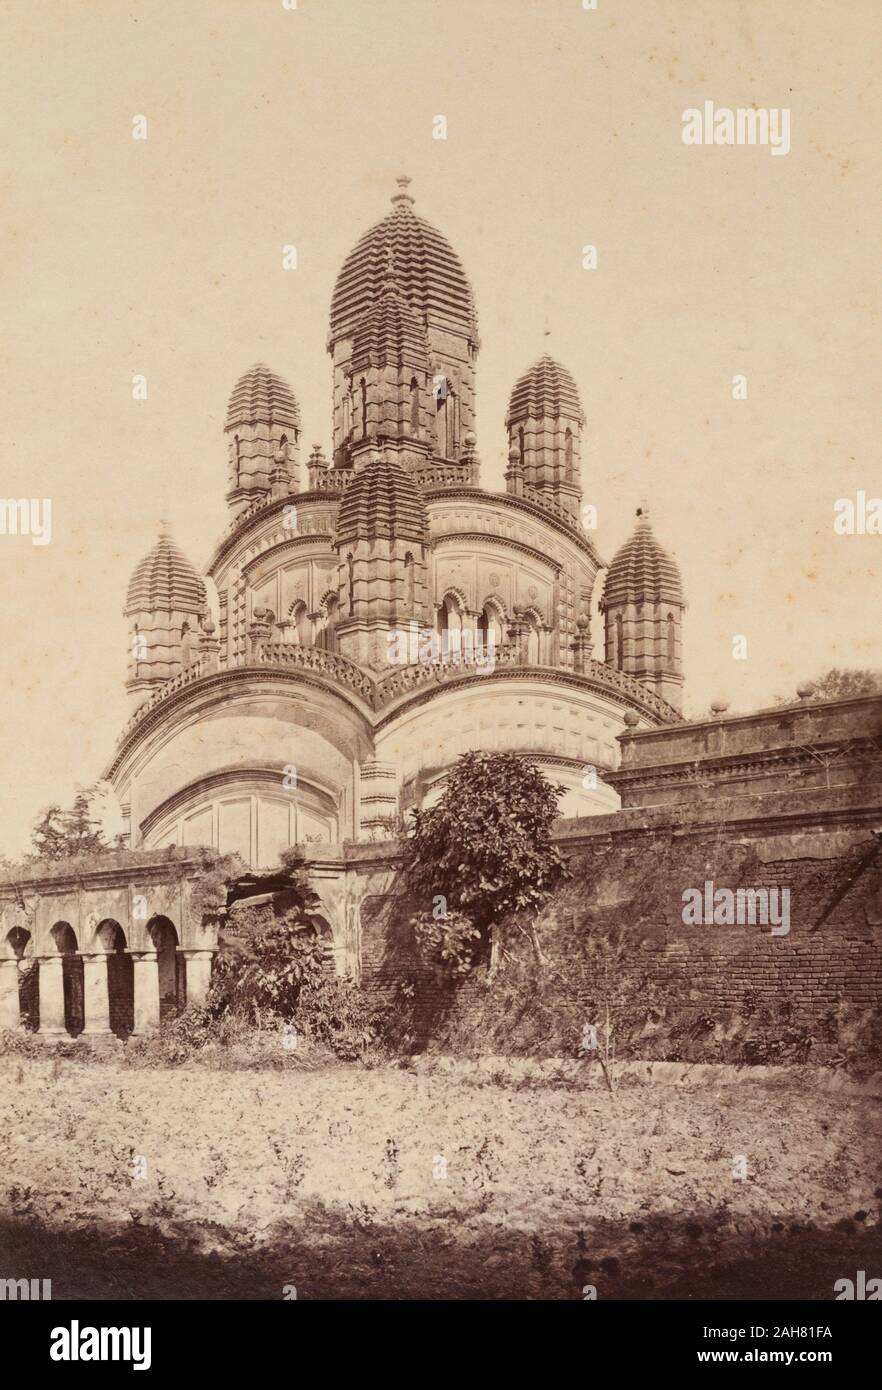 India, The Dakshineswar Kali temple in Kolkata, constructed 1847-1855 and adorned with nine 'chhatris' (cenotaphs), each capped with a beehive-shaped dome.Original manuscript caption: Temple at Kali Ghat, circa 1905. 2003/071/1/1/3/11. Stock Photo